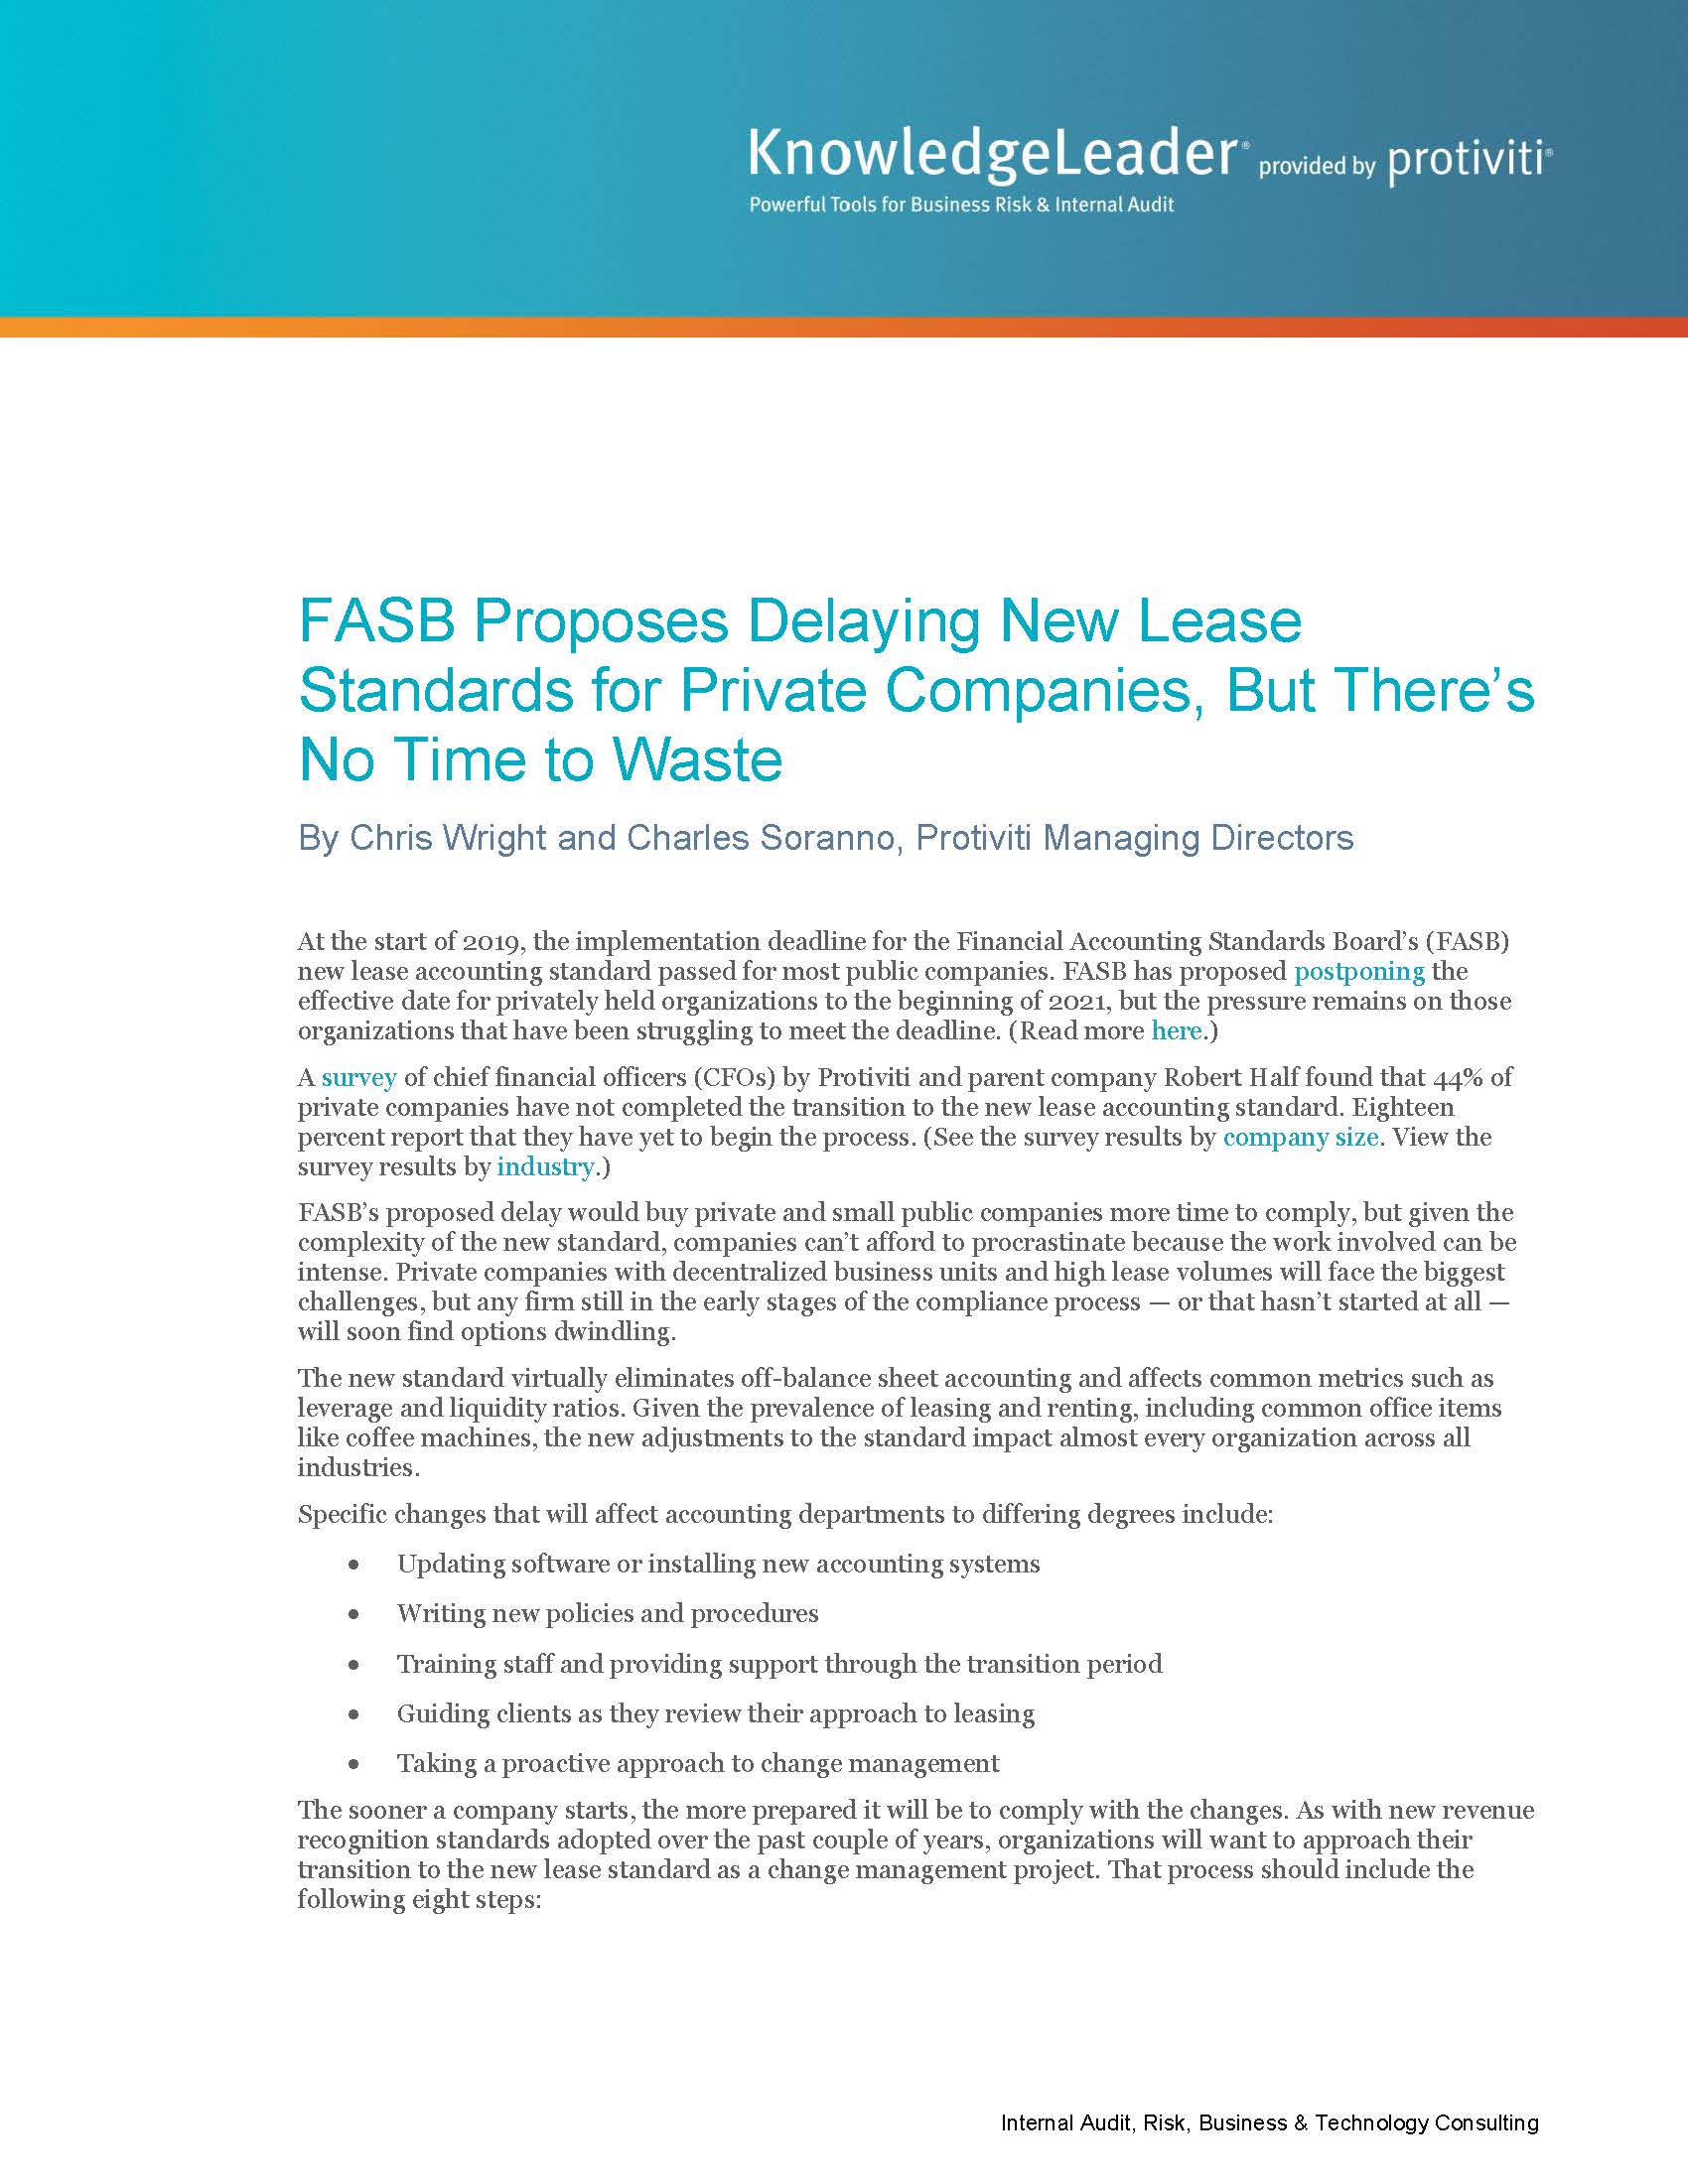 Screenshot of the first page of FASB Proposes Delaying New Lease Standards for Private Companies, But There’s No Time to Waste.